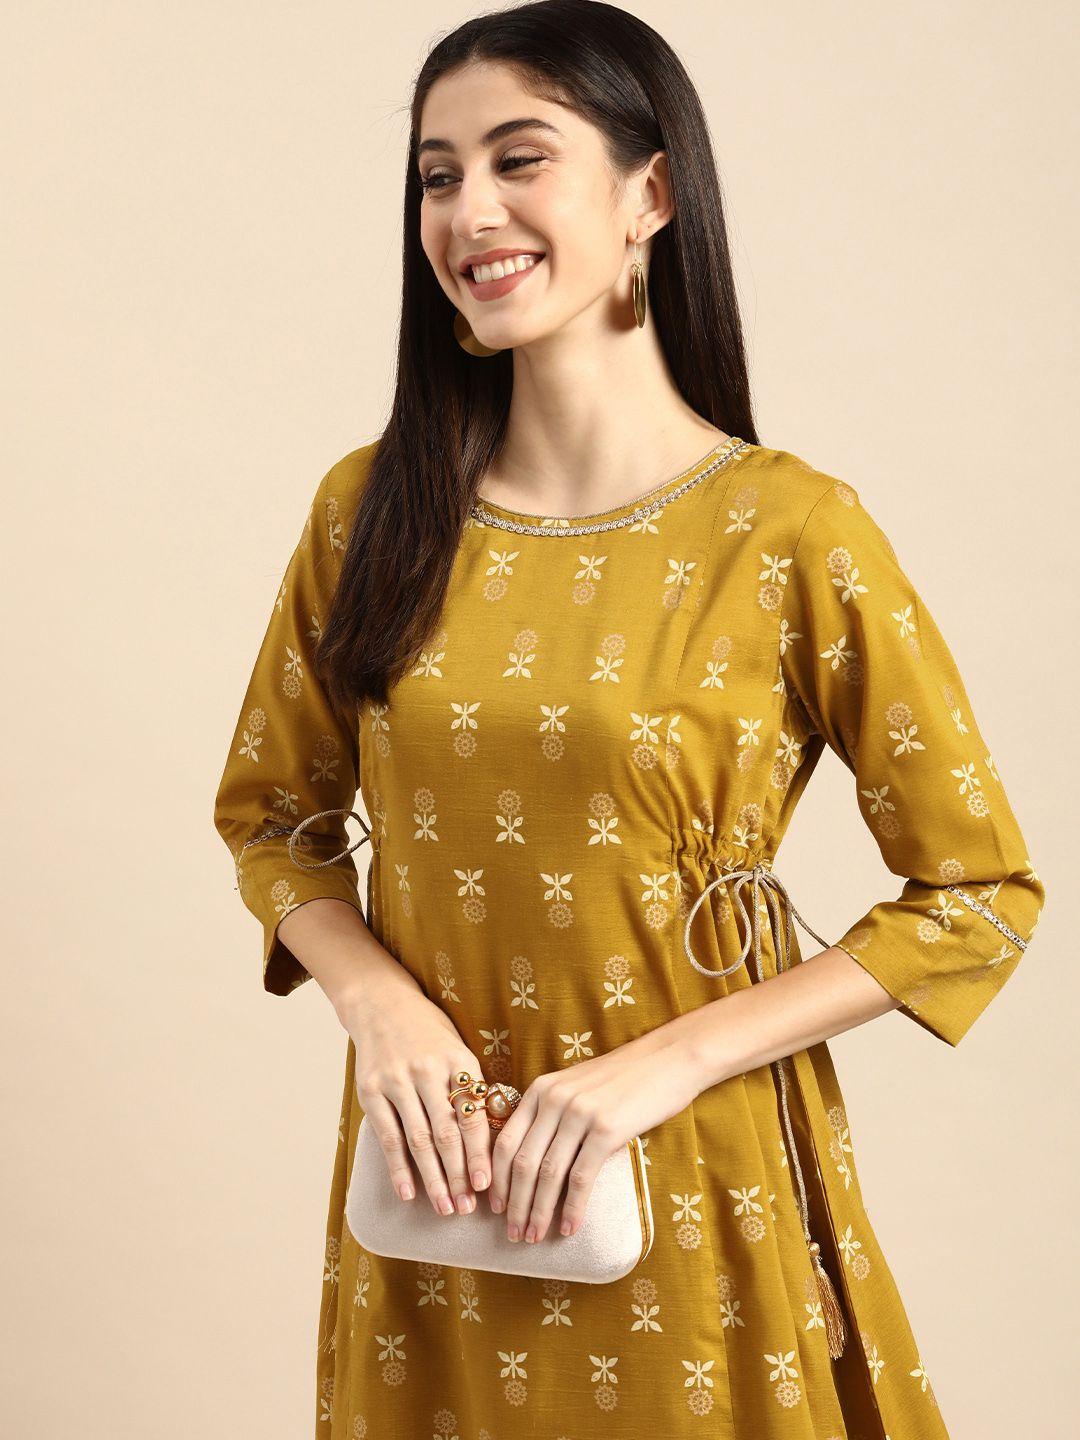 all-about-you-mustard-yellow-ethnic-motifs-ethnic-a-line-midi-dress